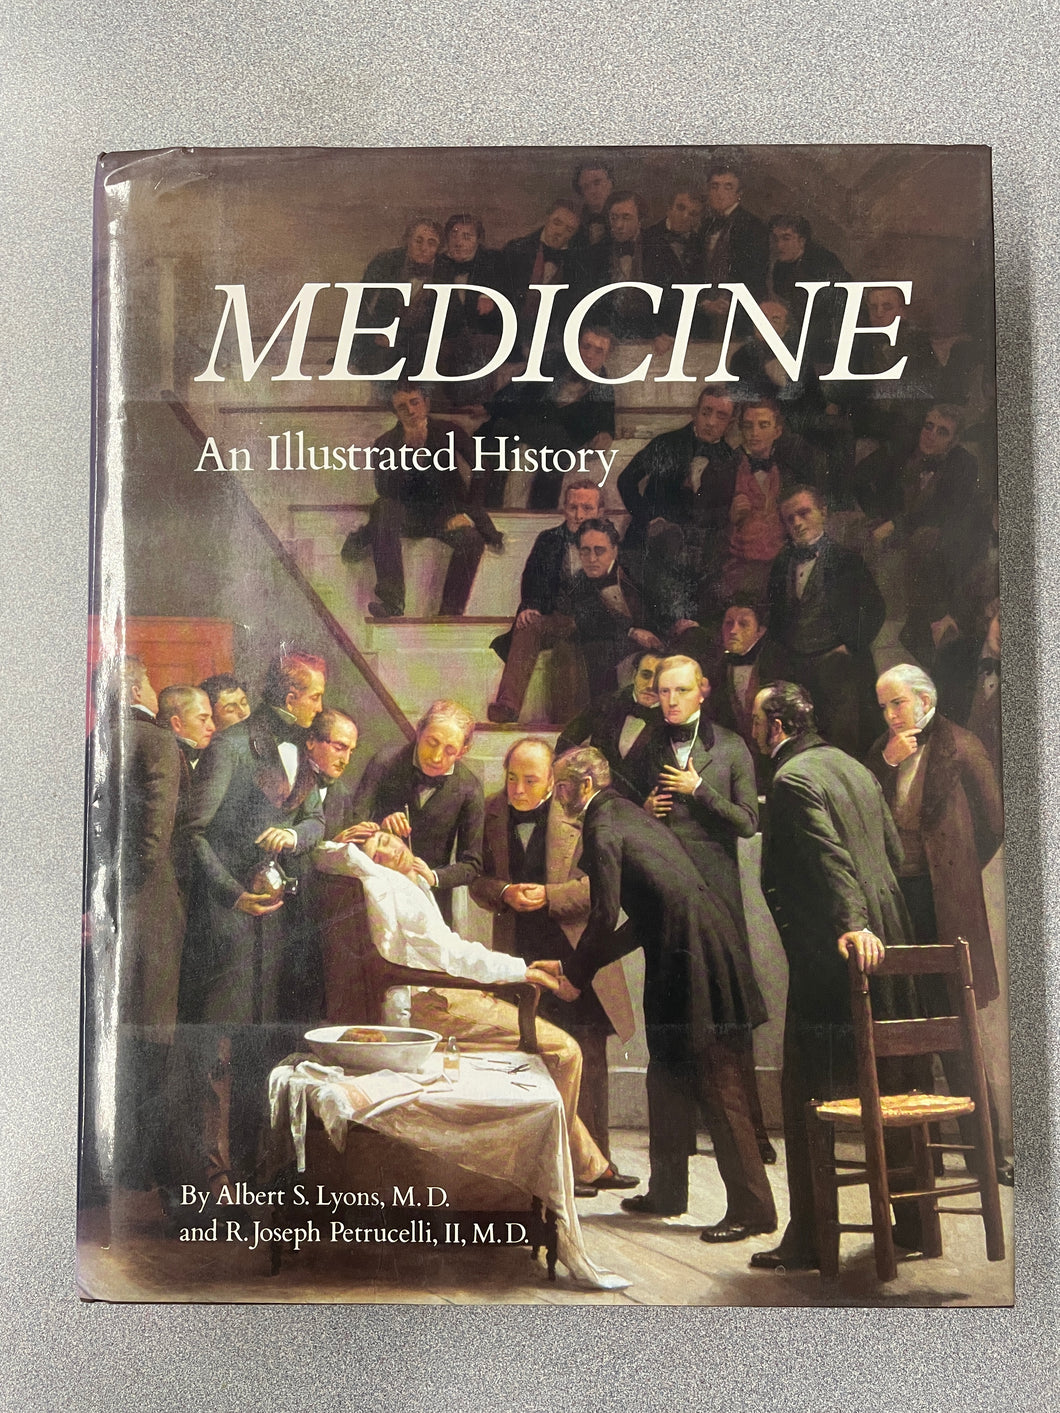 SN  Medicine: An Illustrated History, Lyons, Albert S. and R. Joseph Petrucelli [1997] N 4/24